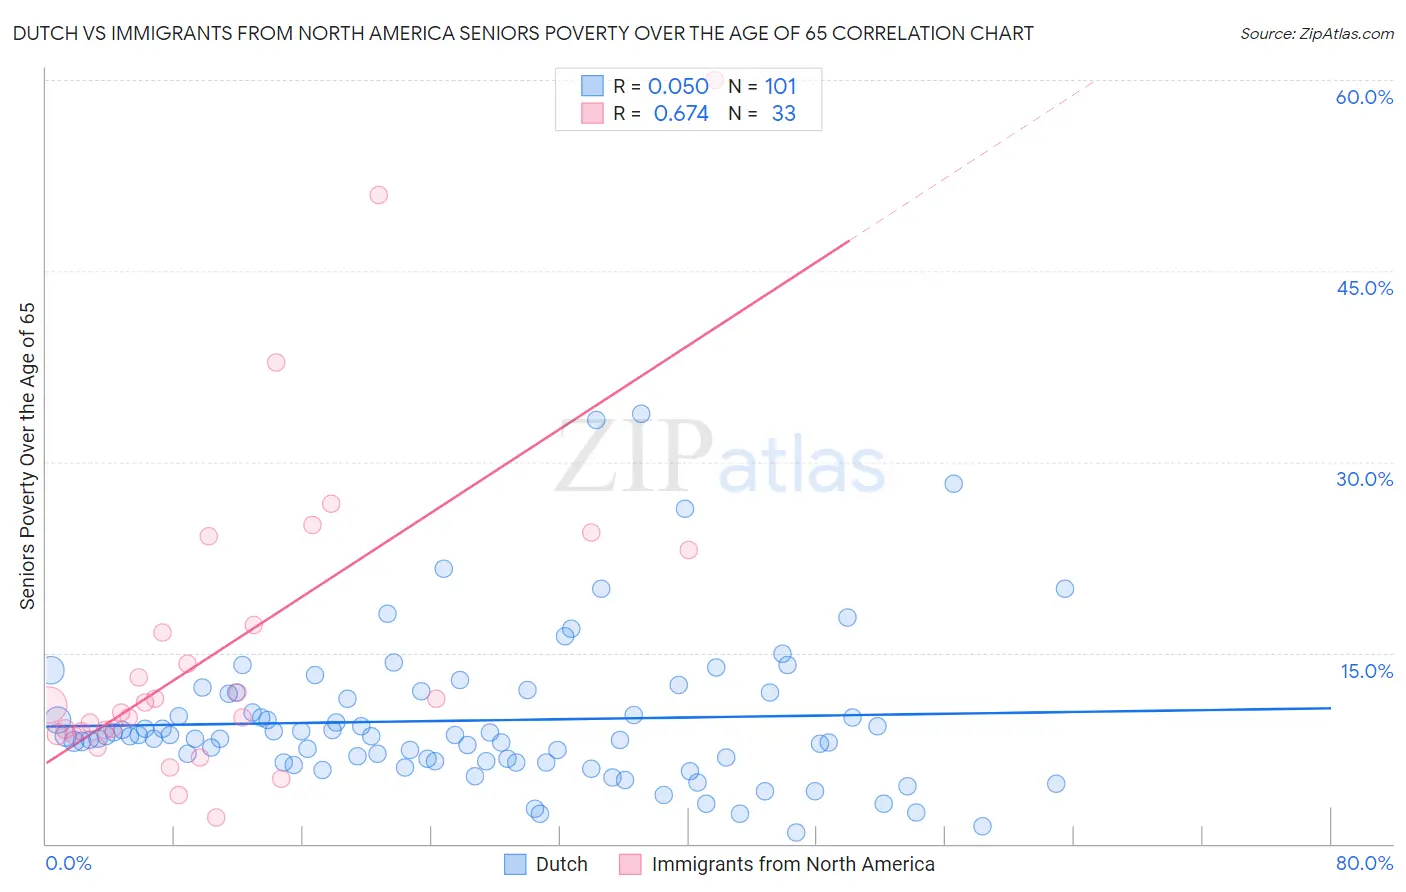 Dutch vs Immigrants from North America Seniors Poverty Over the Age of 65